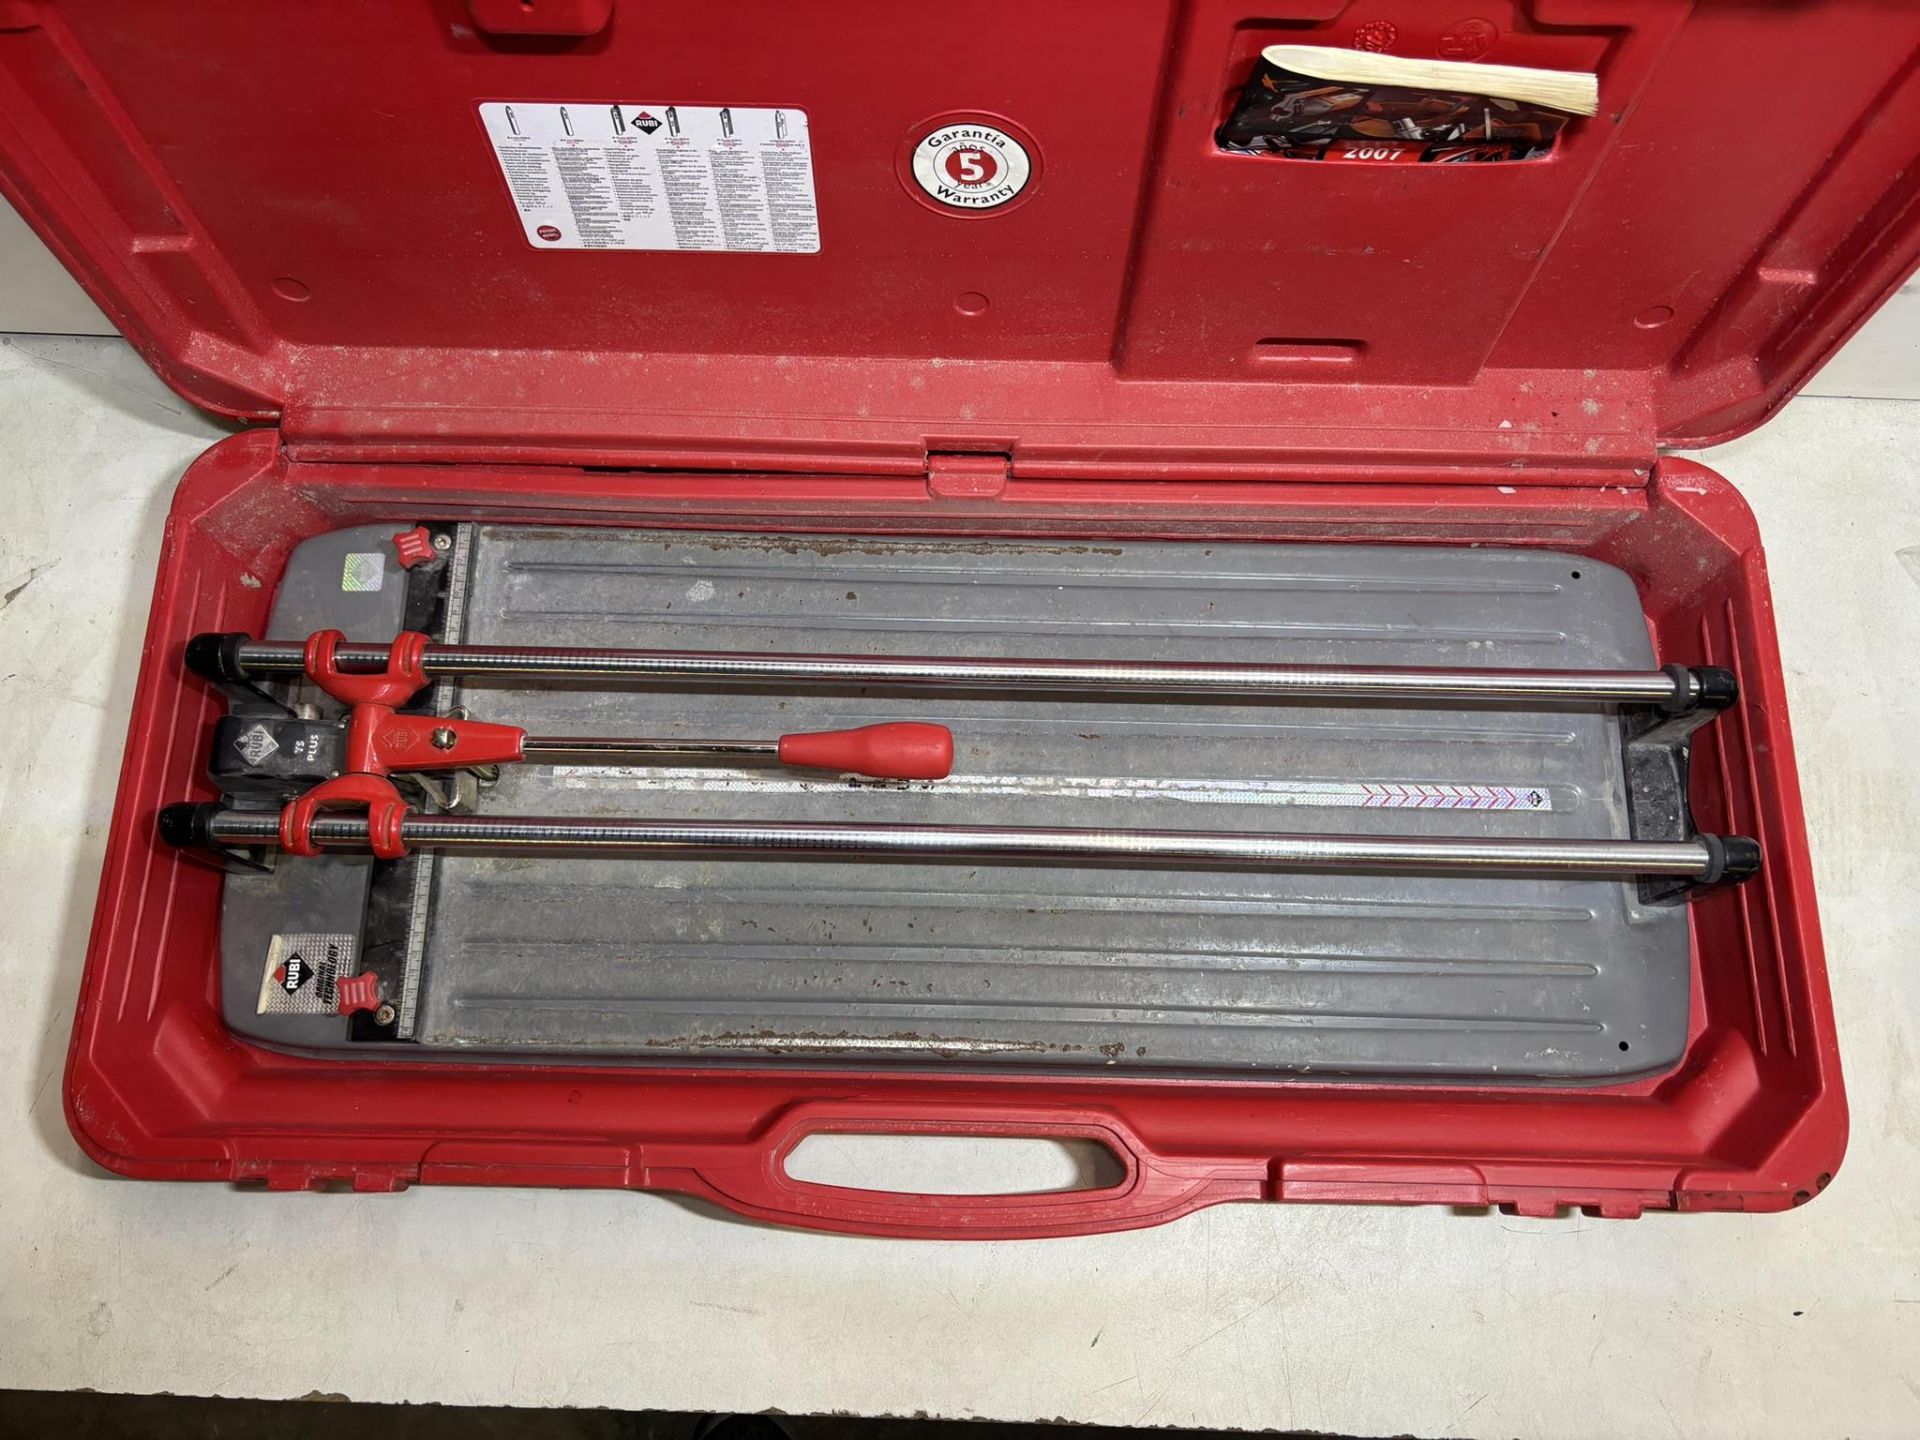 RUBI TS-60-PLUS 16960 26 inch (66 cm) Professional Tile Cutter - Image 2 of 5